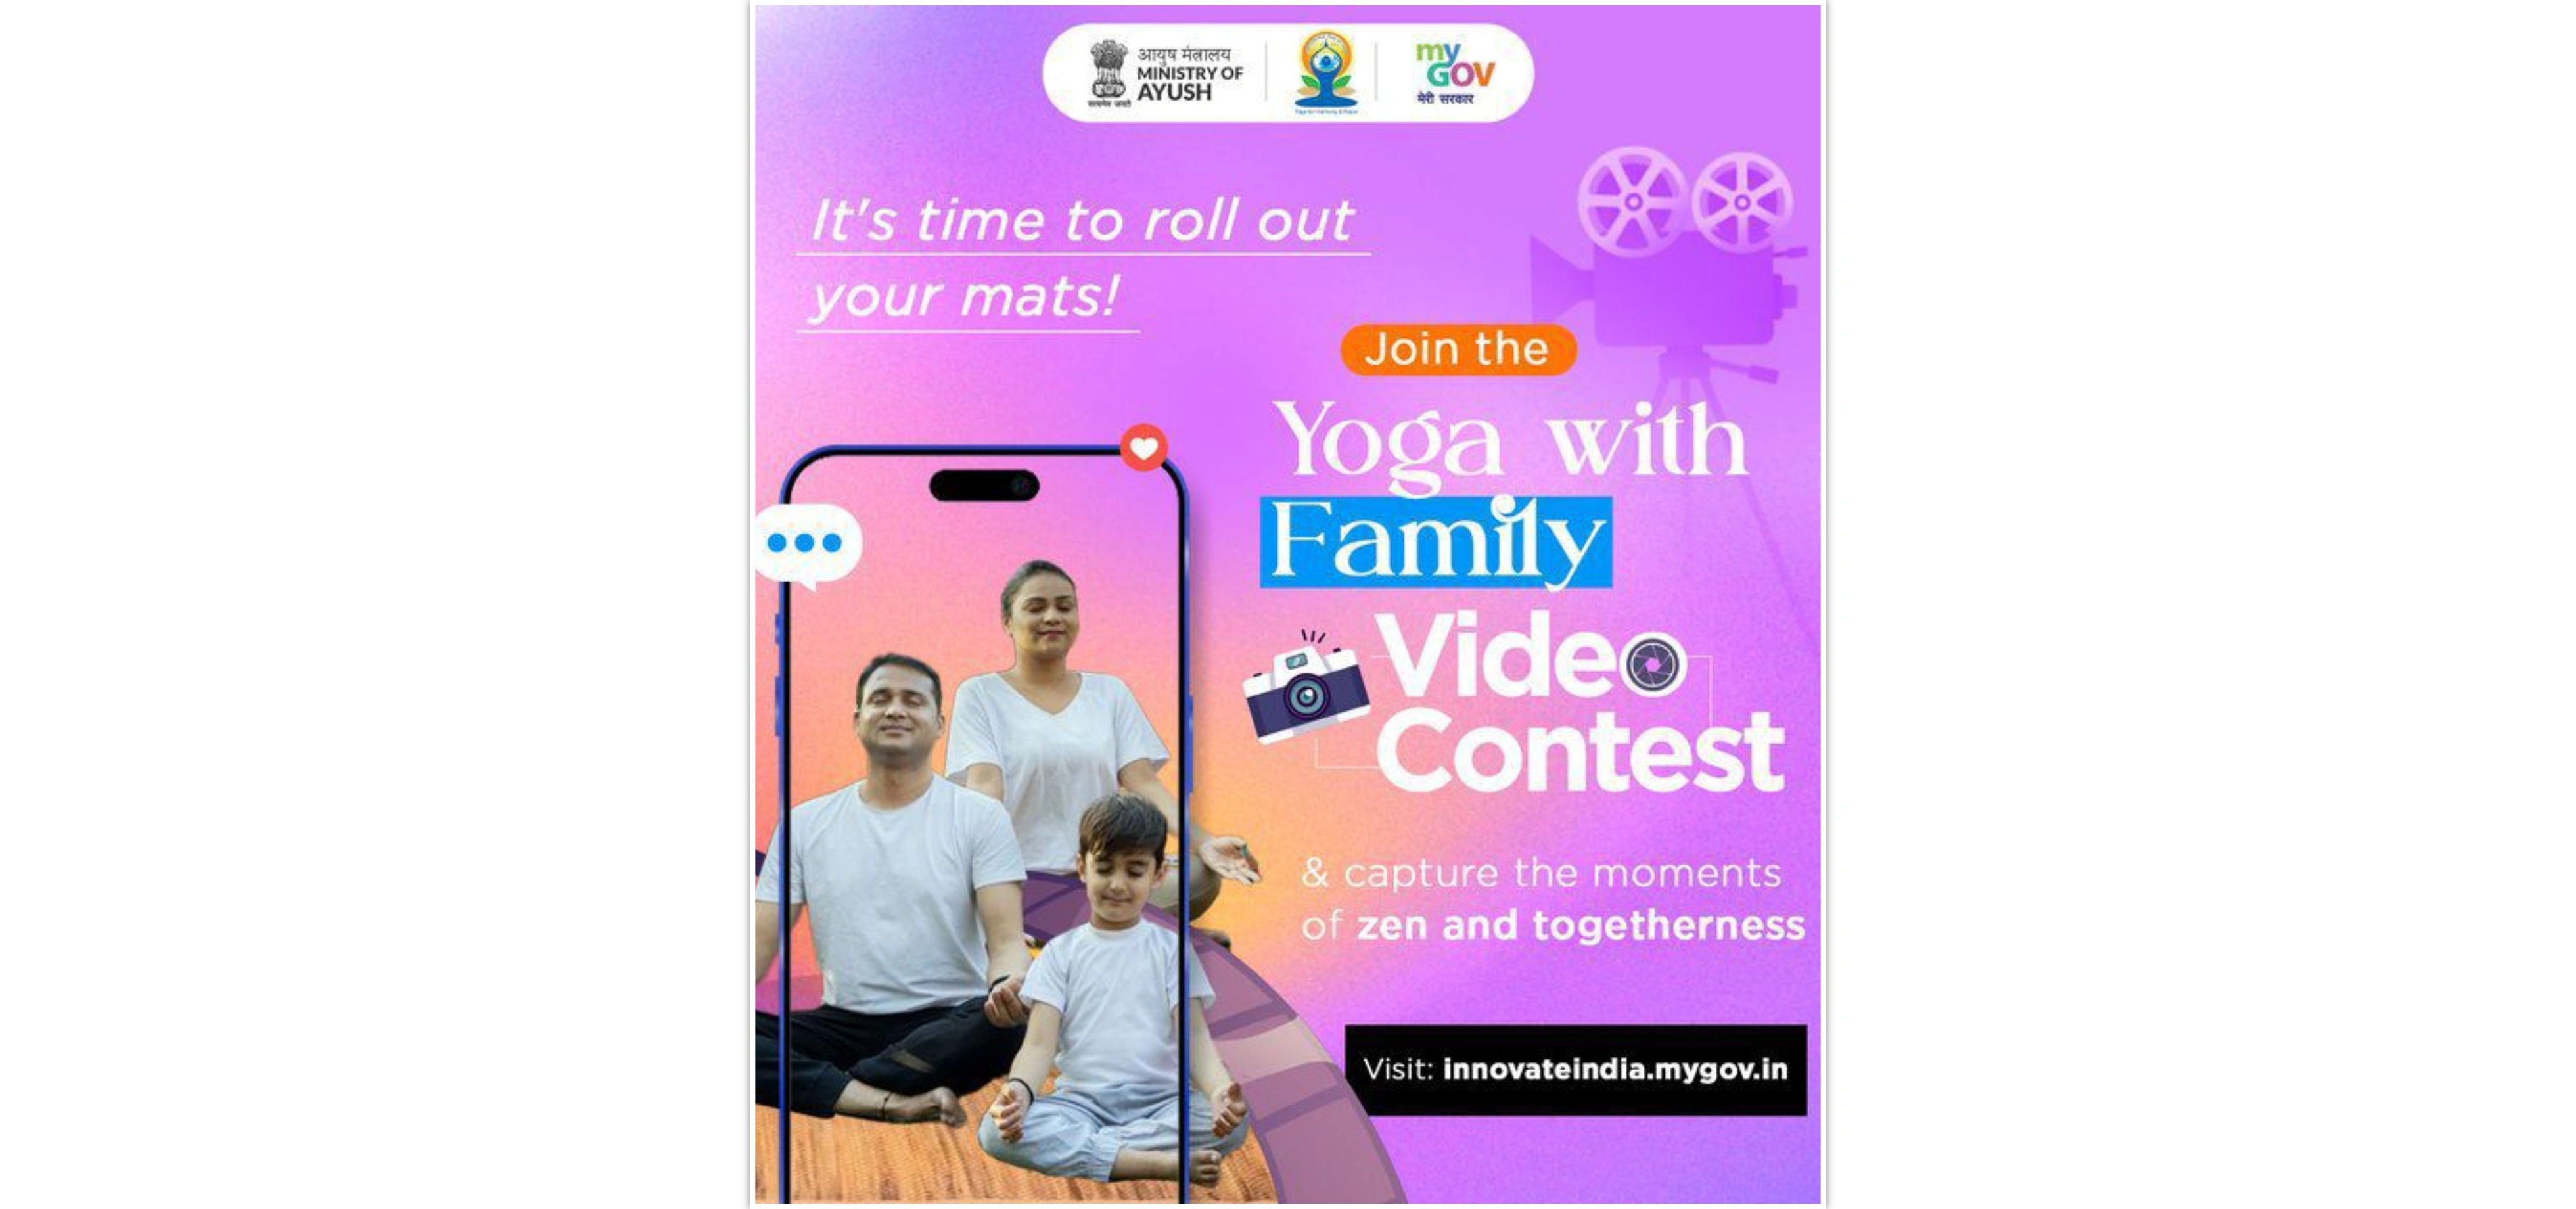 Yoga with Family video contest